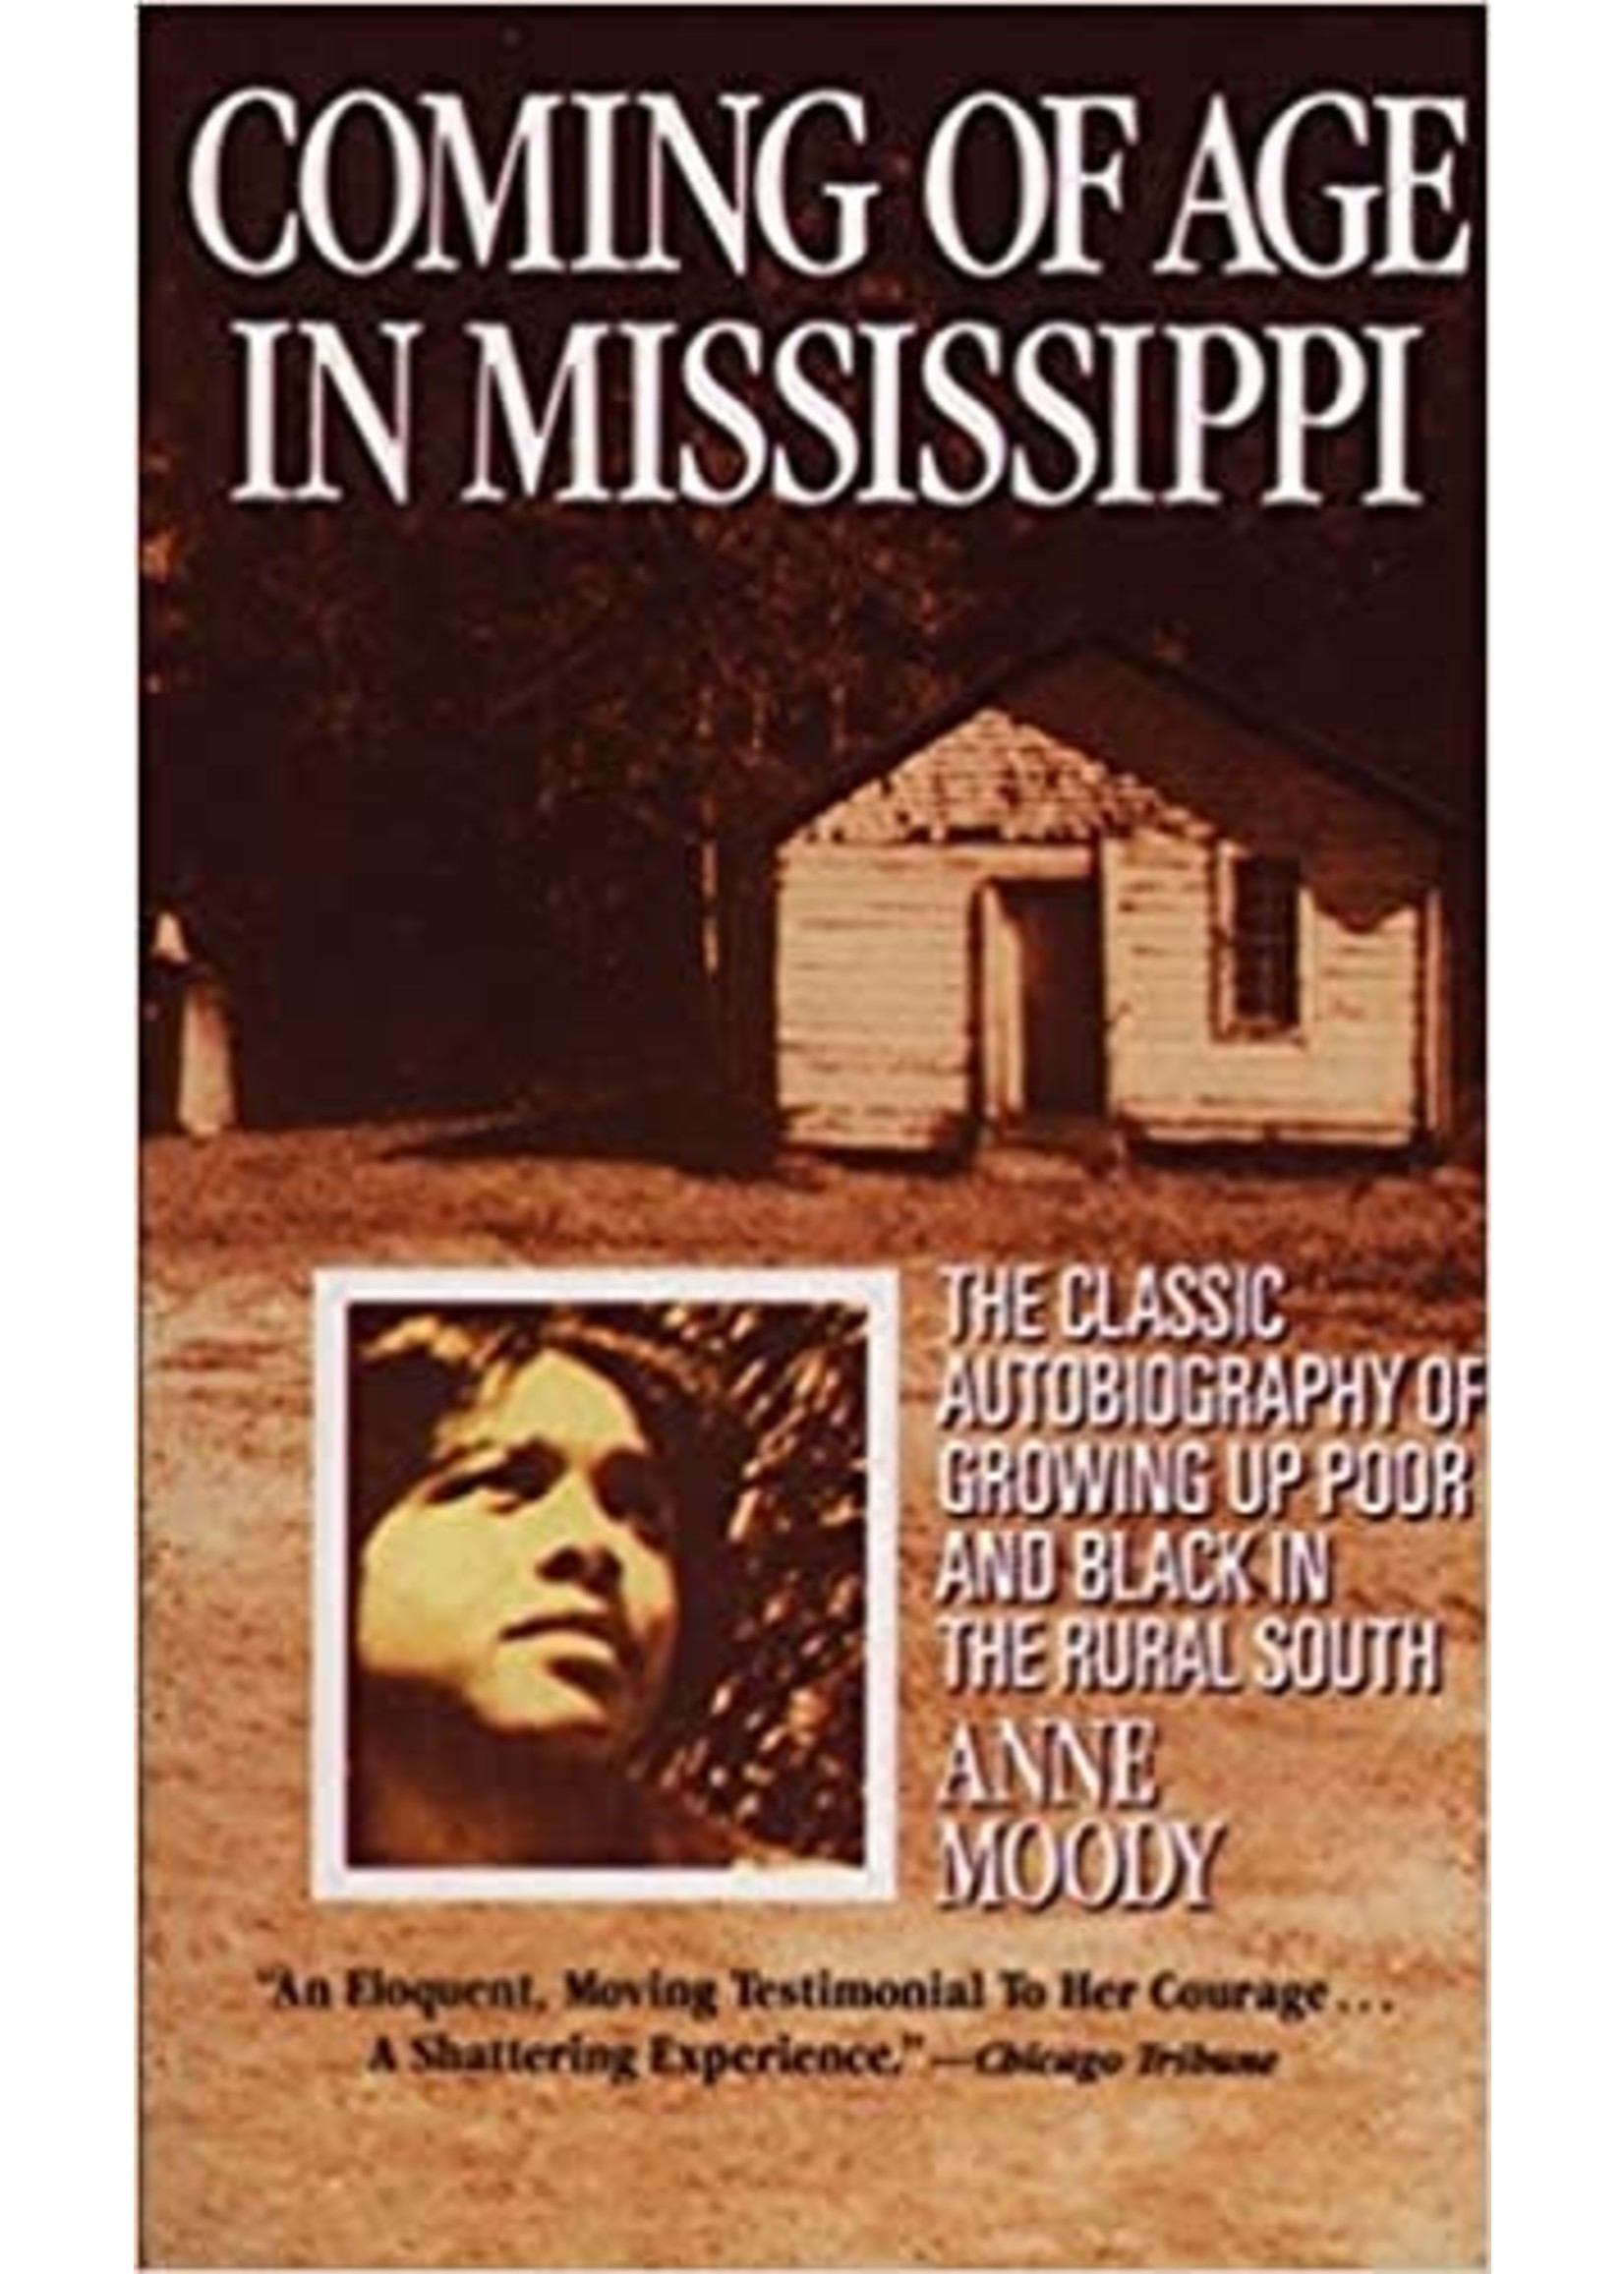 Coming of Age in Mississippi: The Classic Autobiography of Growing Up Poor and Black in the Rural South by Anne Moody